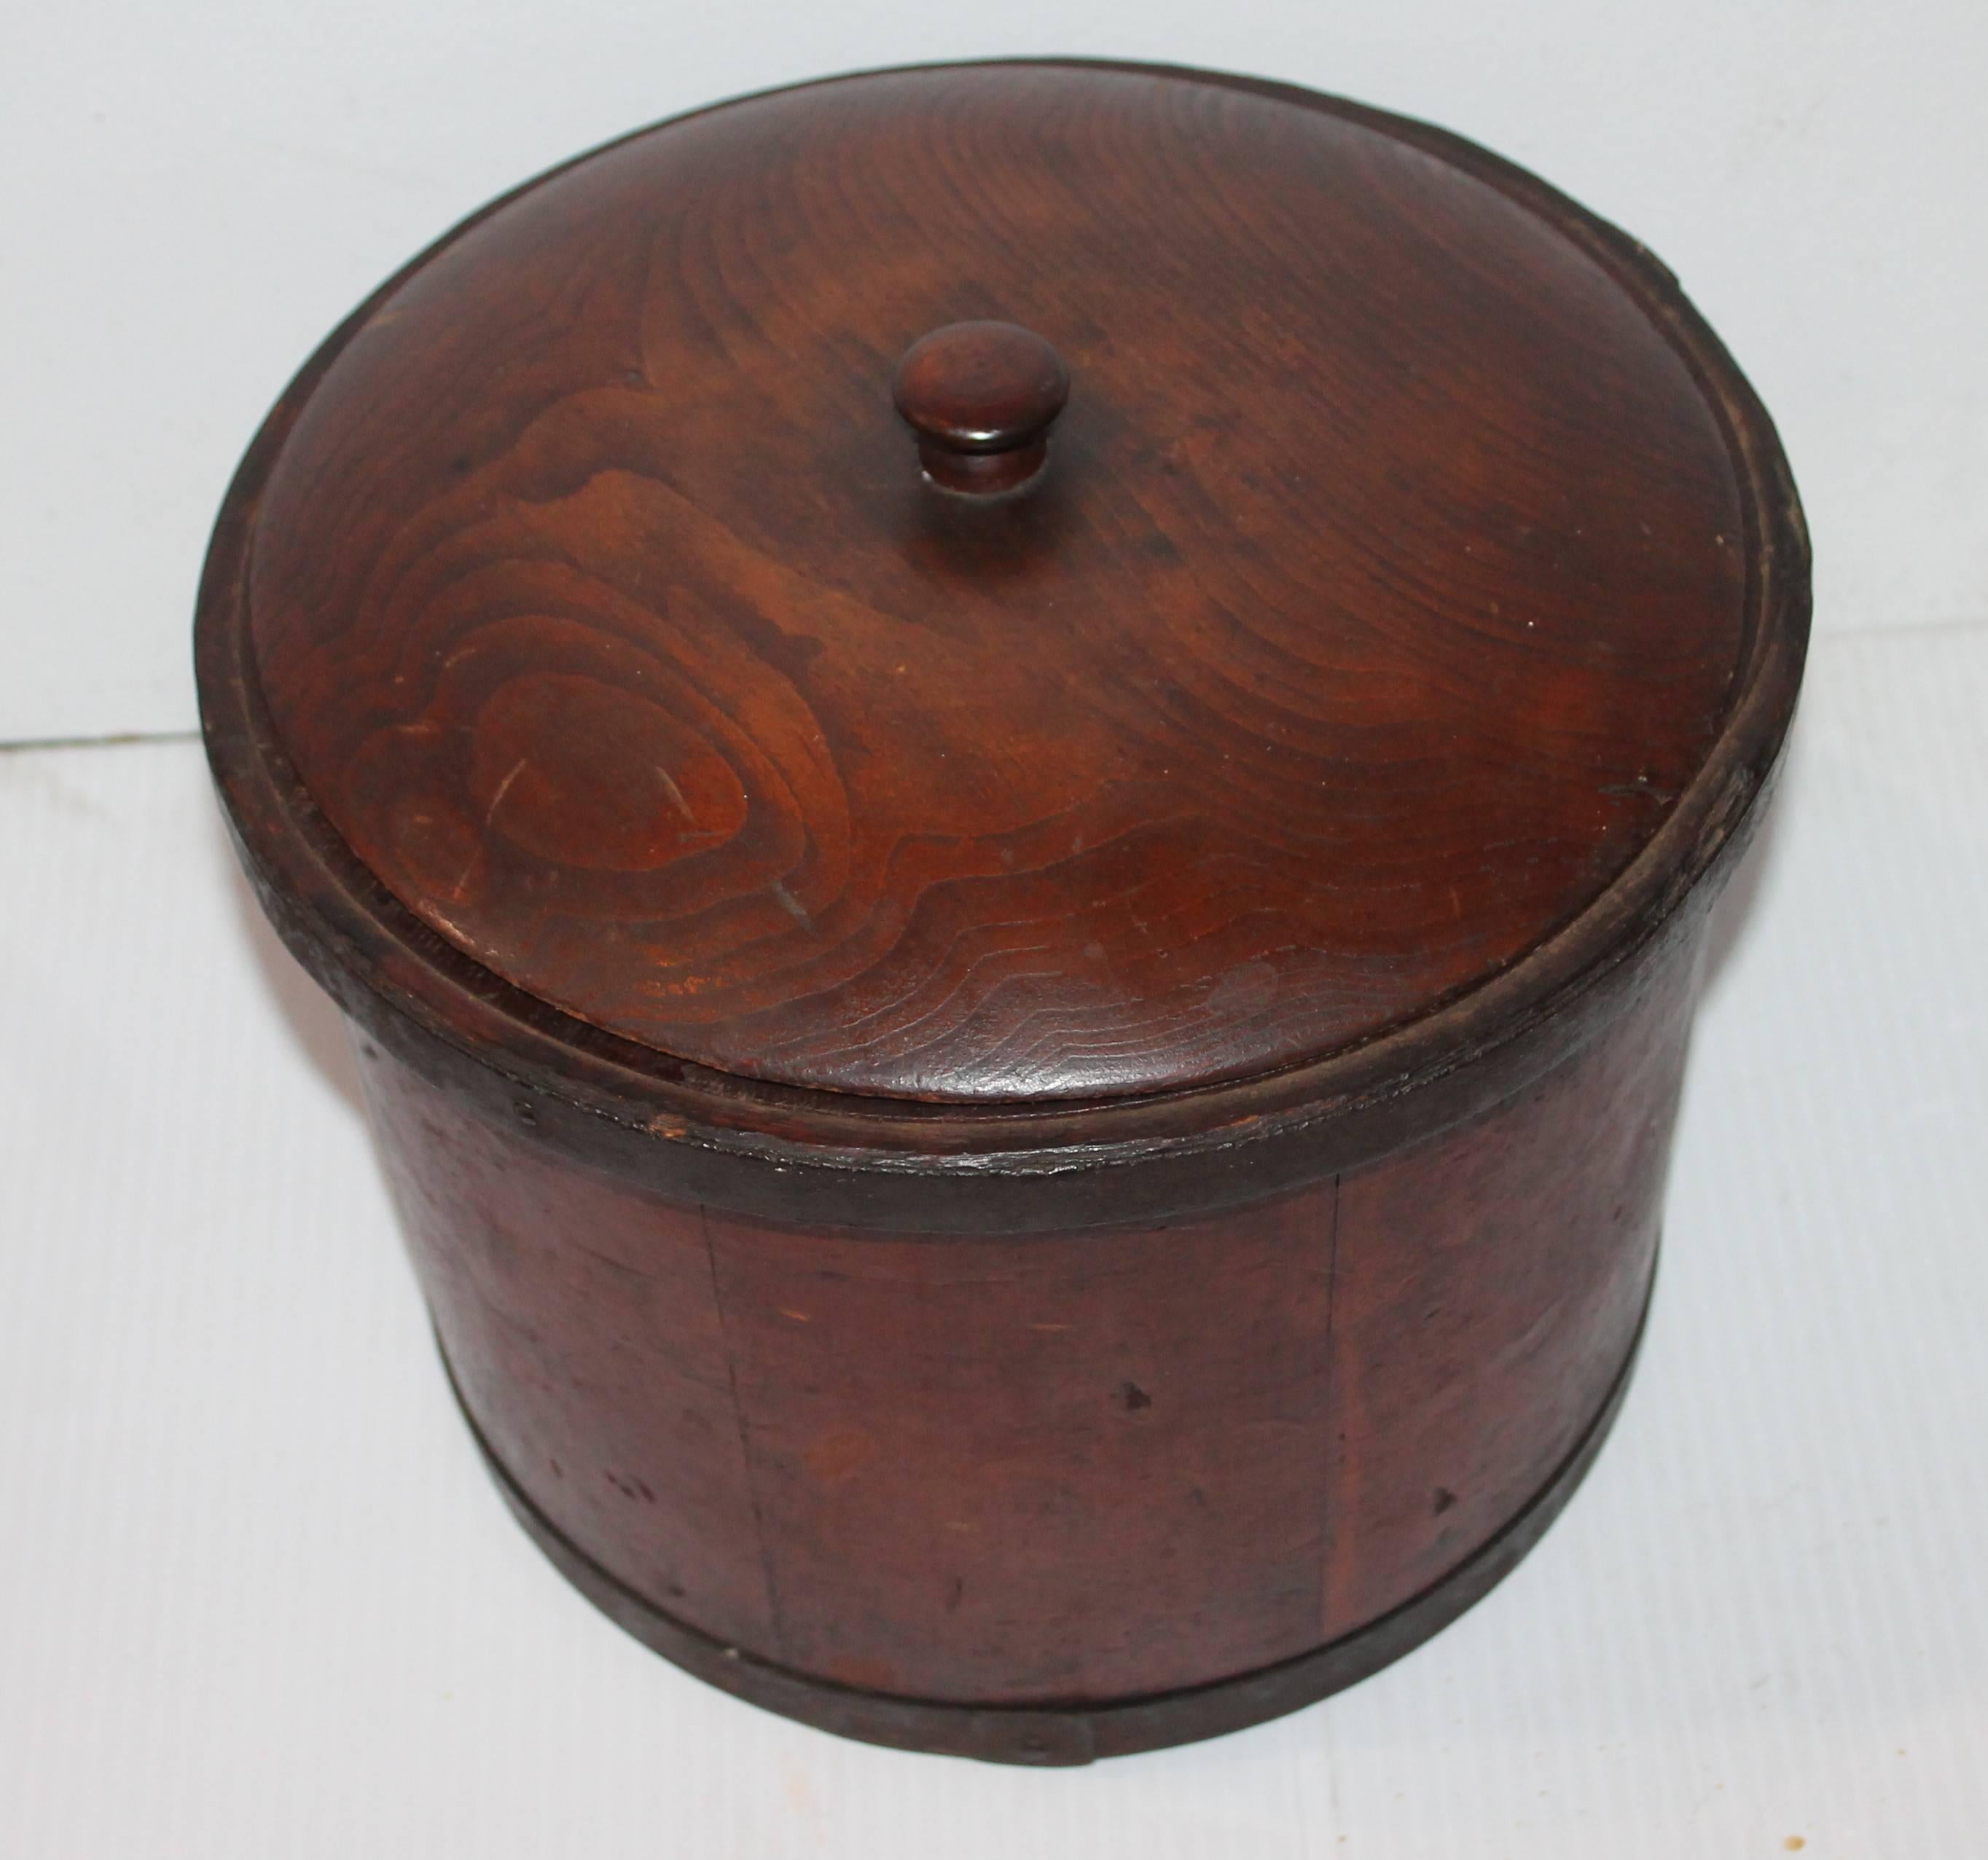 This fantastic original red painted storage box is made in the form of a old New England measure with a make do lid. The painted surface is undisturbed. The box has metal bands around. The condition is fantastic.